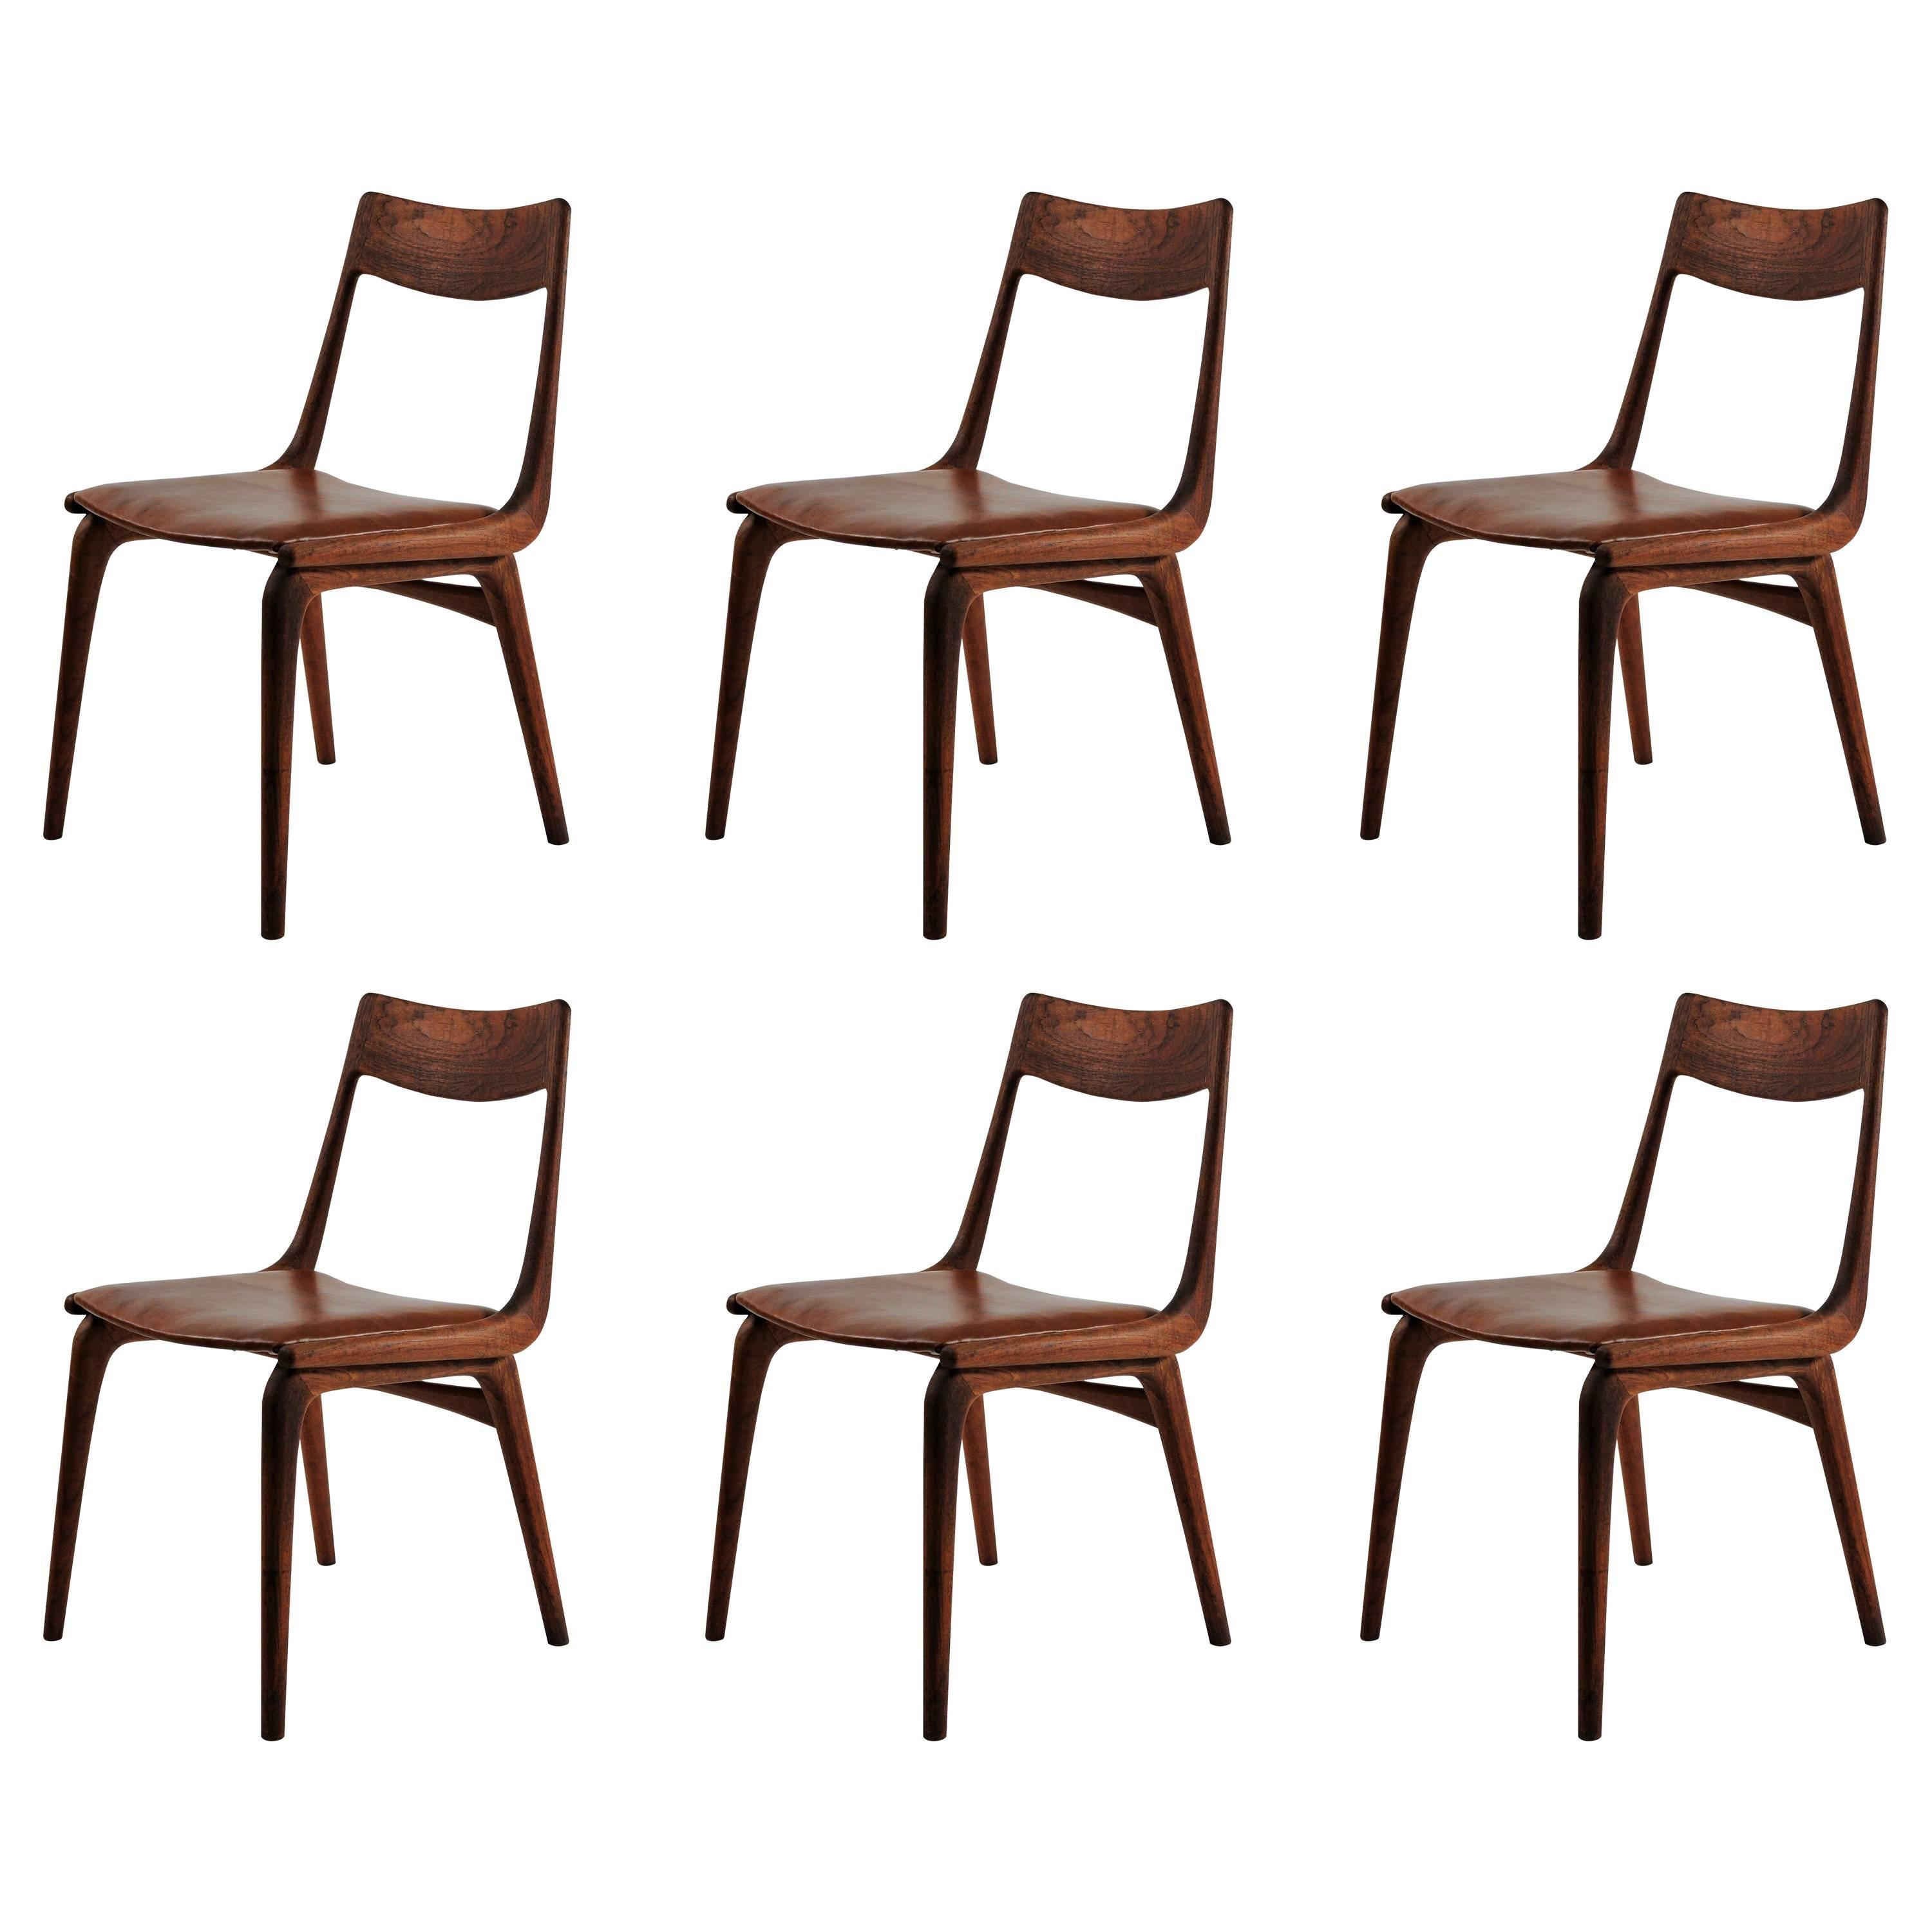 1950s Set of Six Erik Christiansen Boomerang Chairs in Teak and Brown Leather